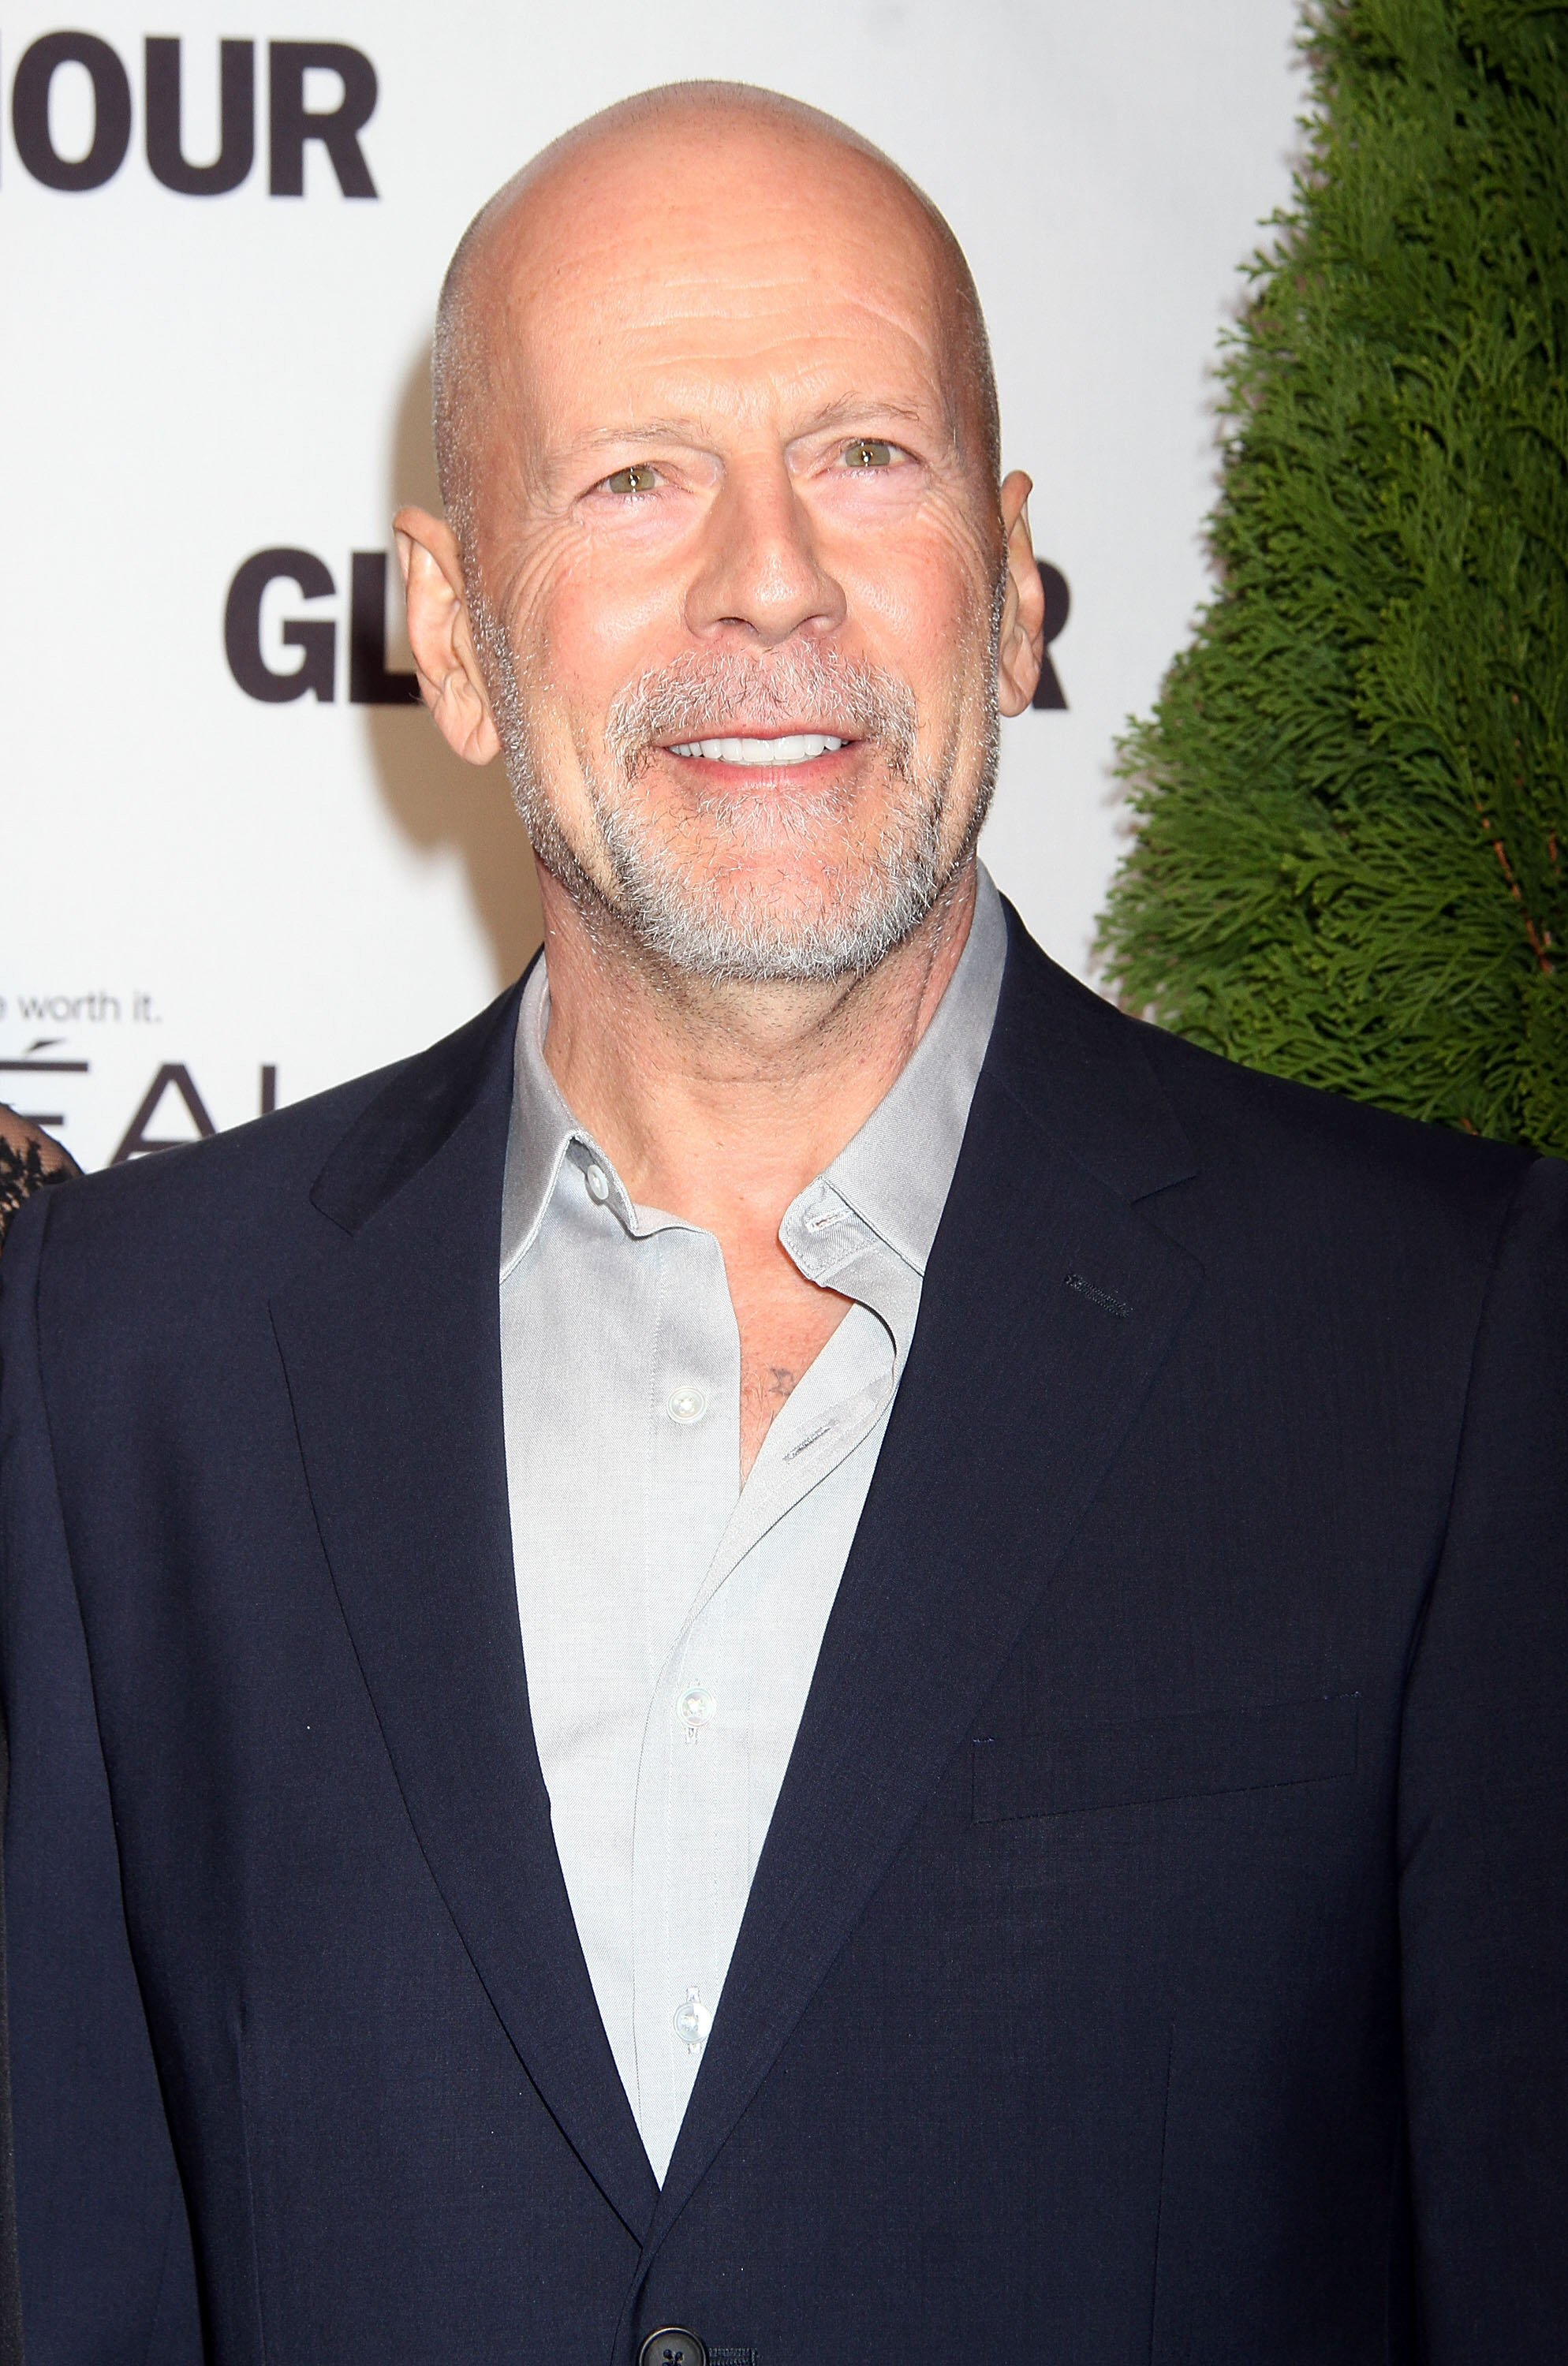 How tall is Bruce Willis?